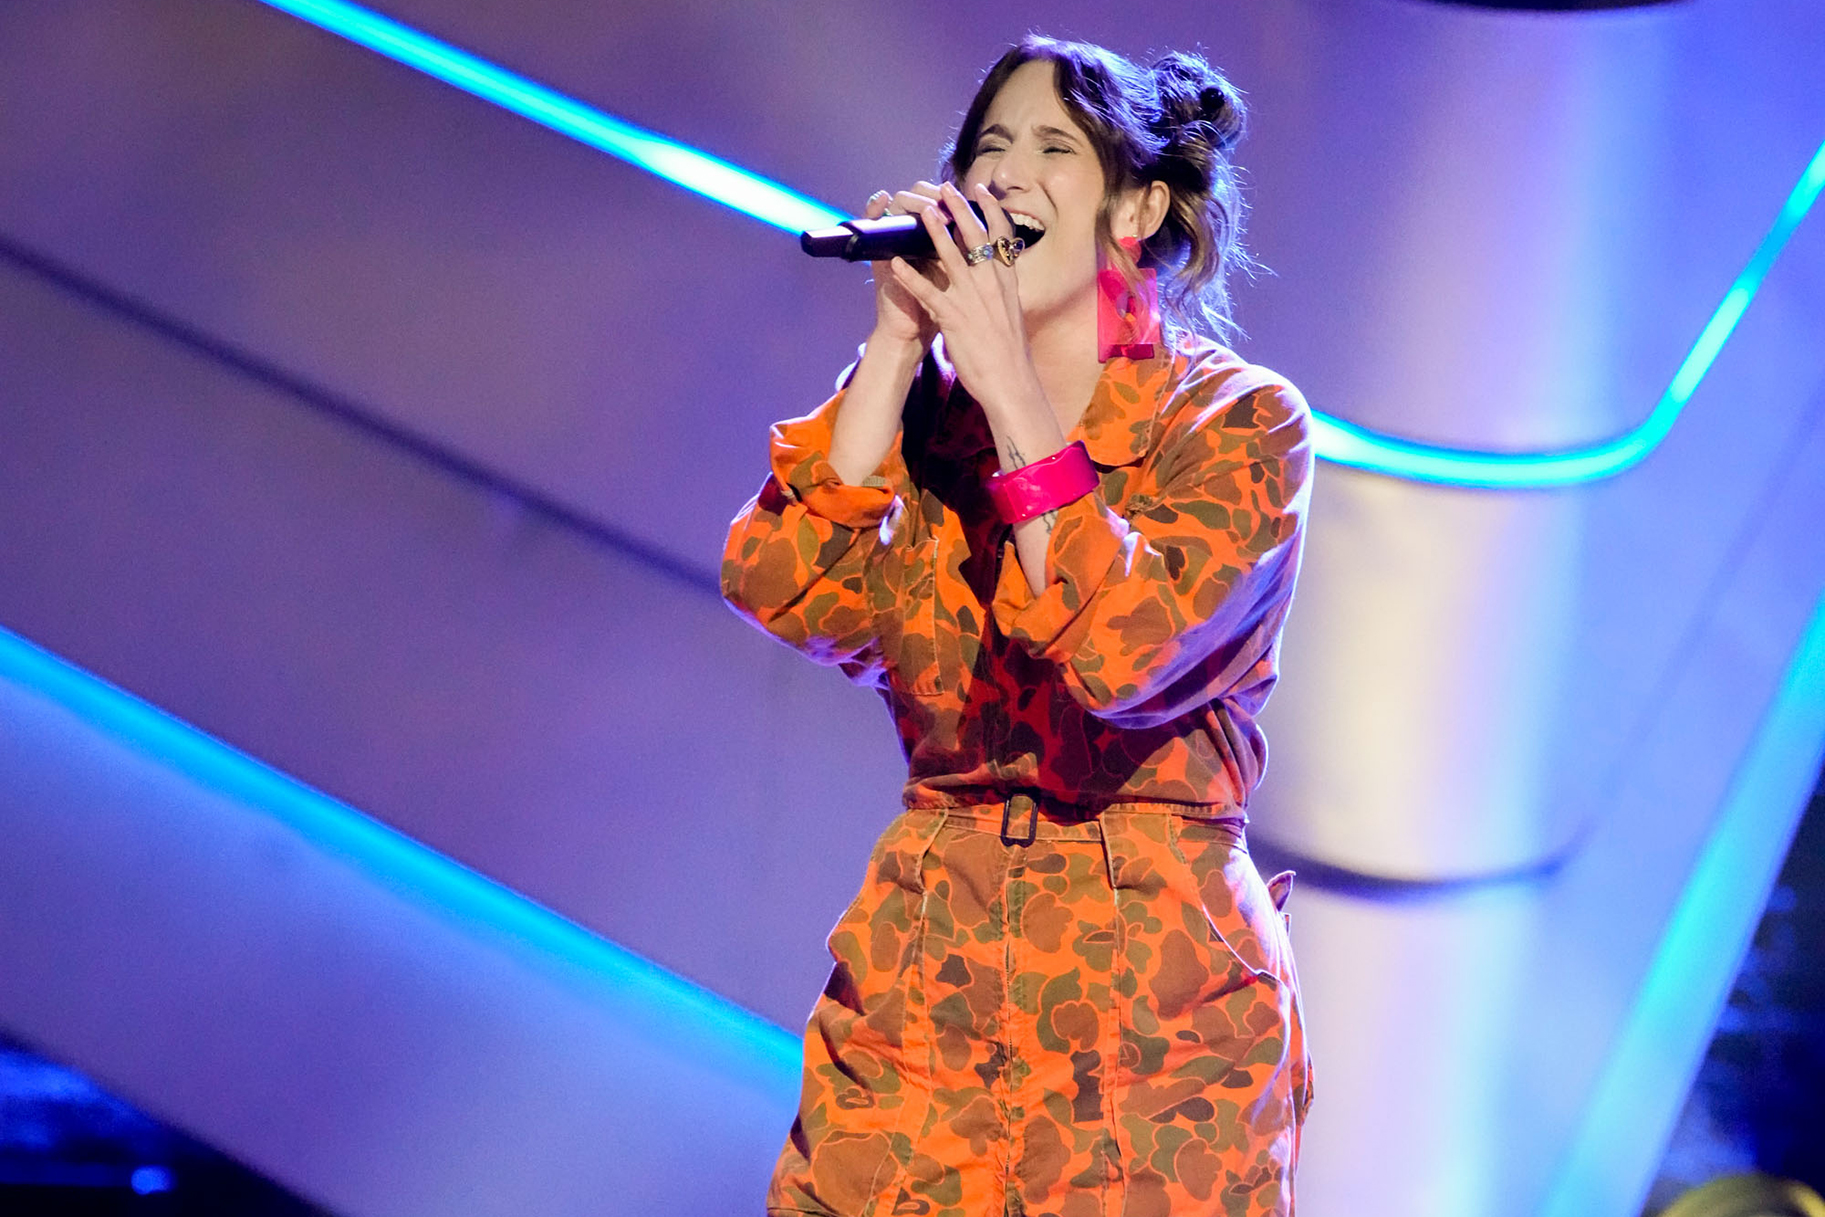 Laura Littleton on The Voice Blind Auditions Part 3